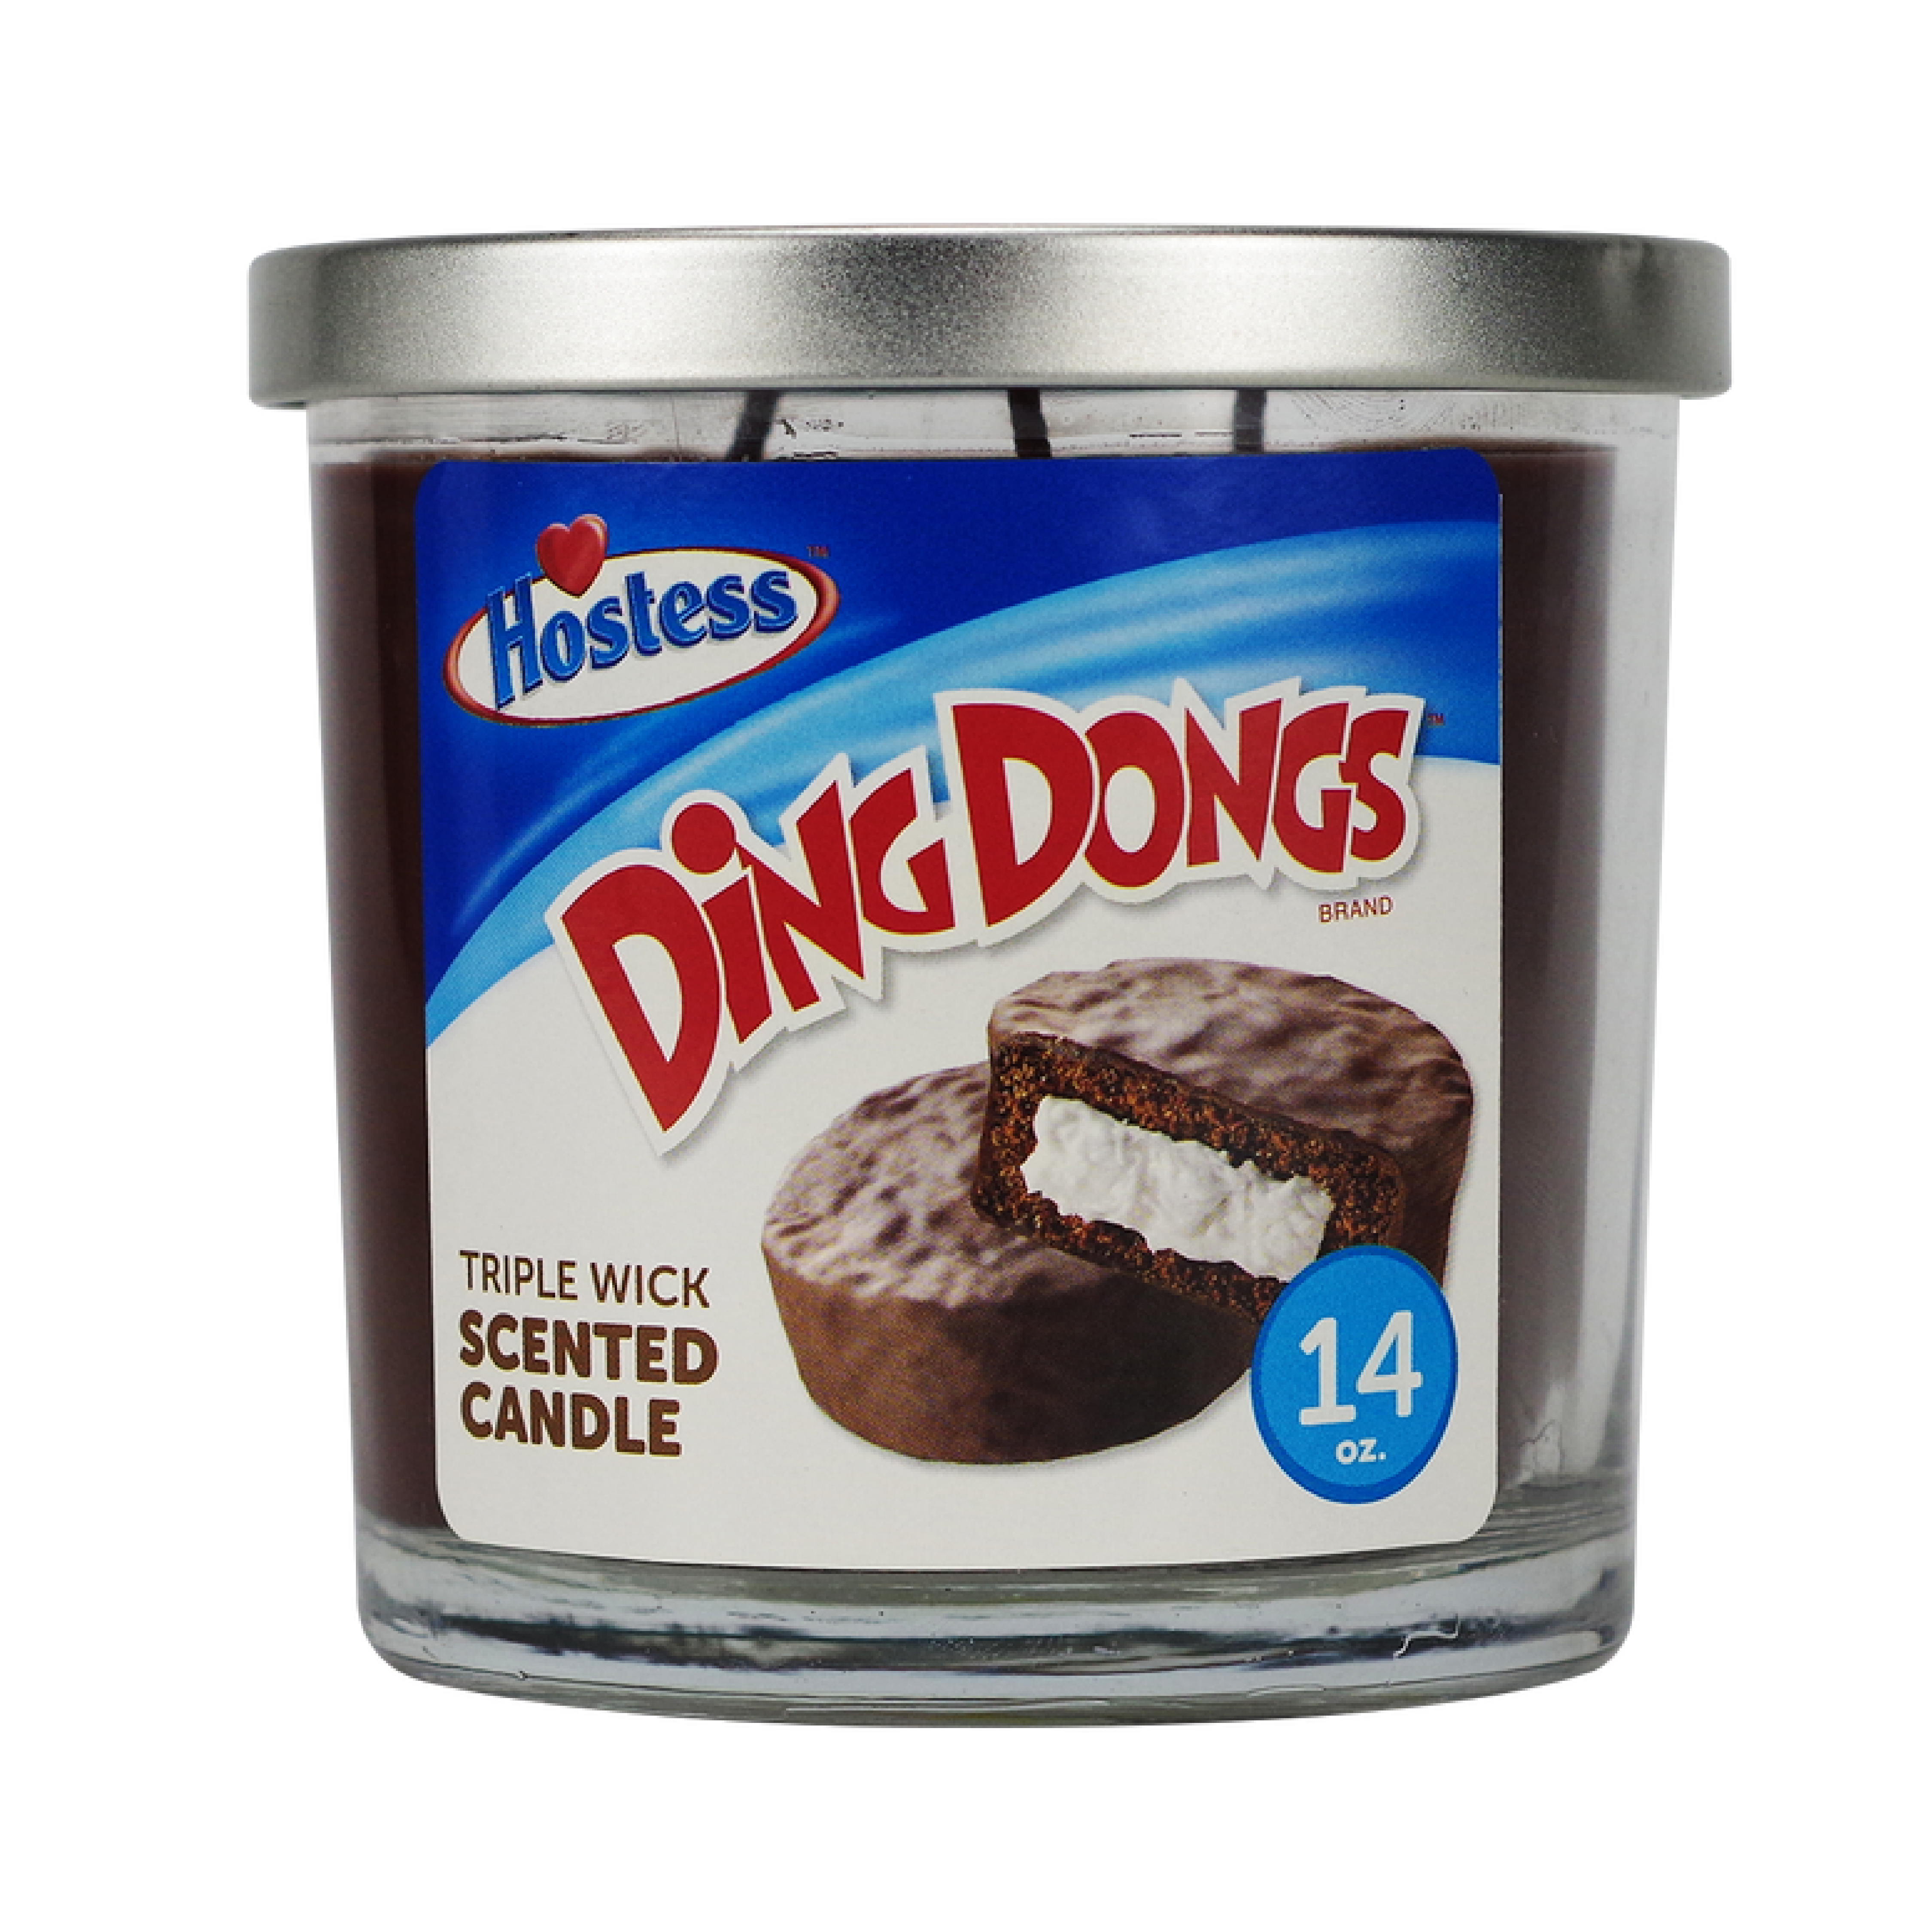 Hostess Ding Dongs Triple Wick Scented Candle 14oz